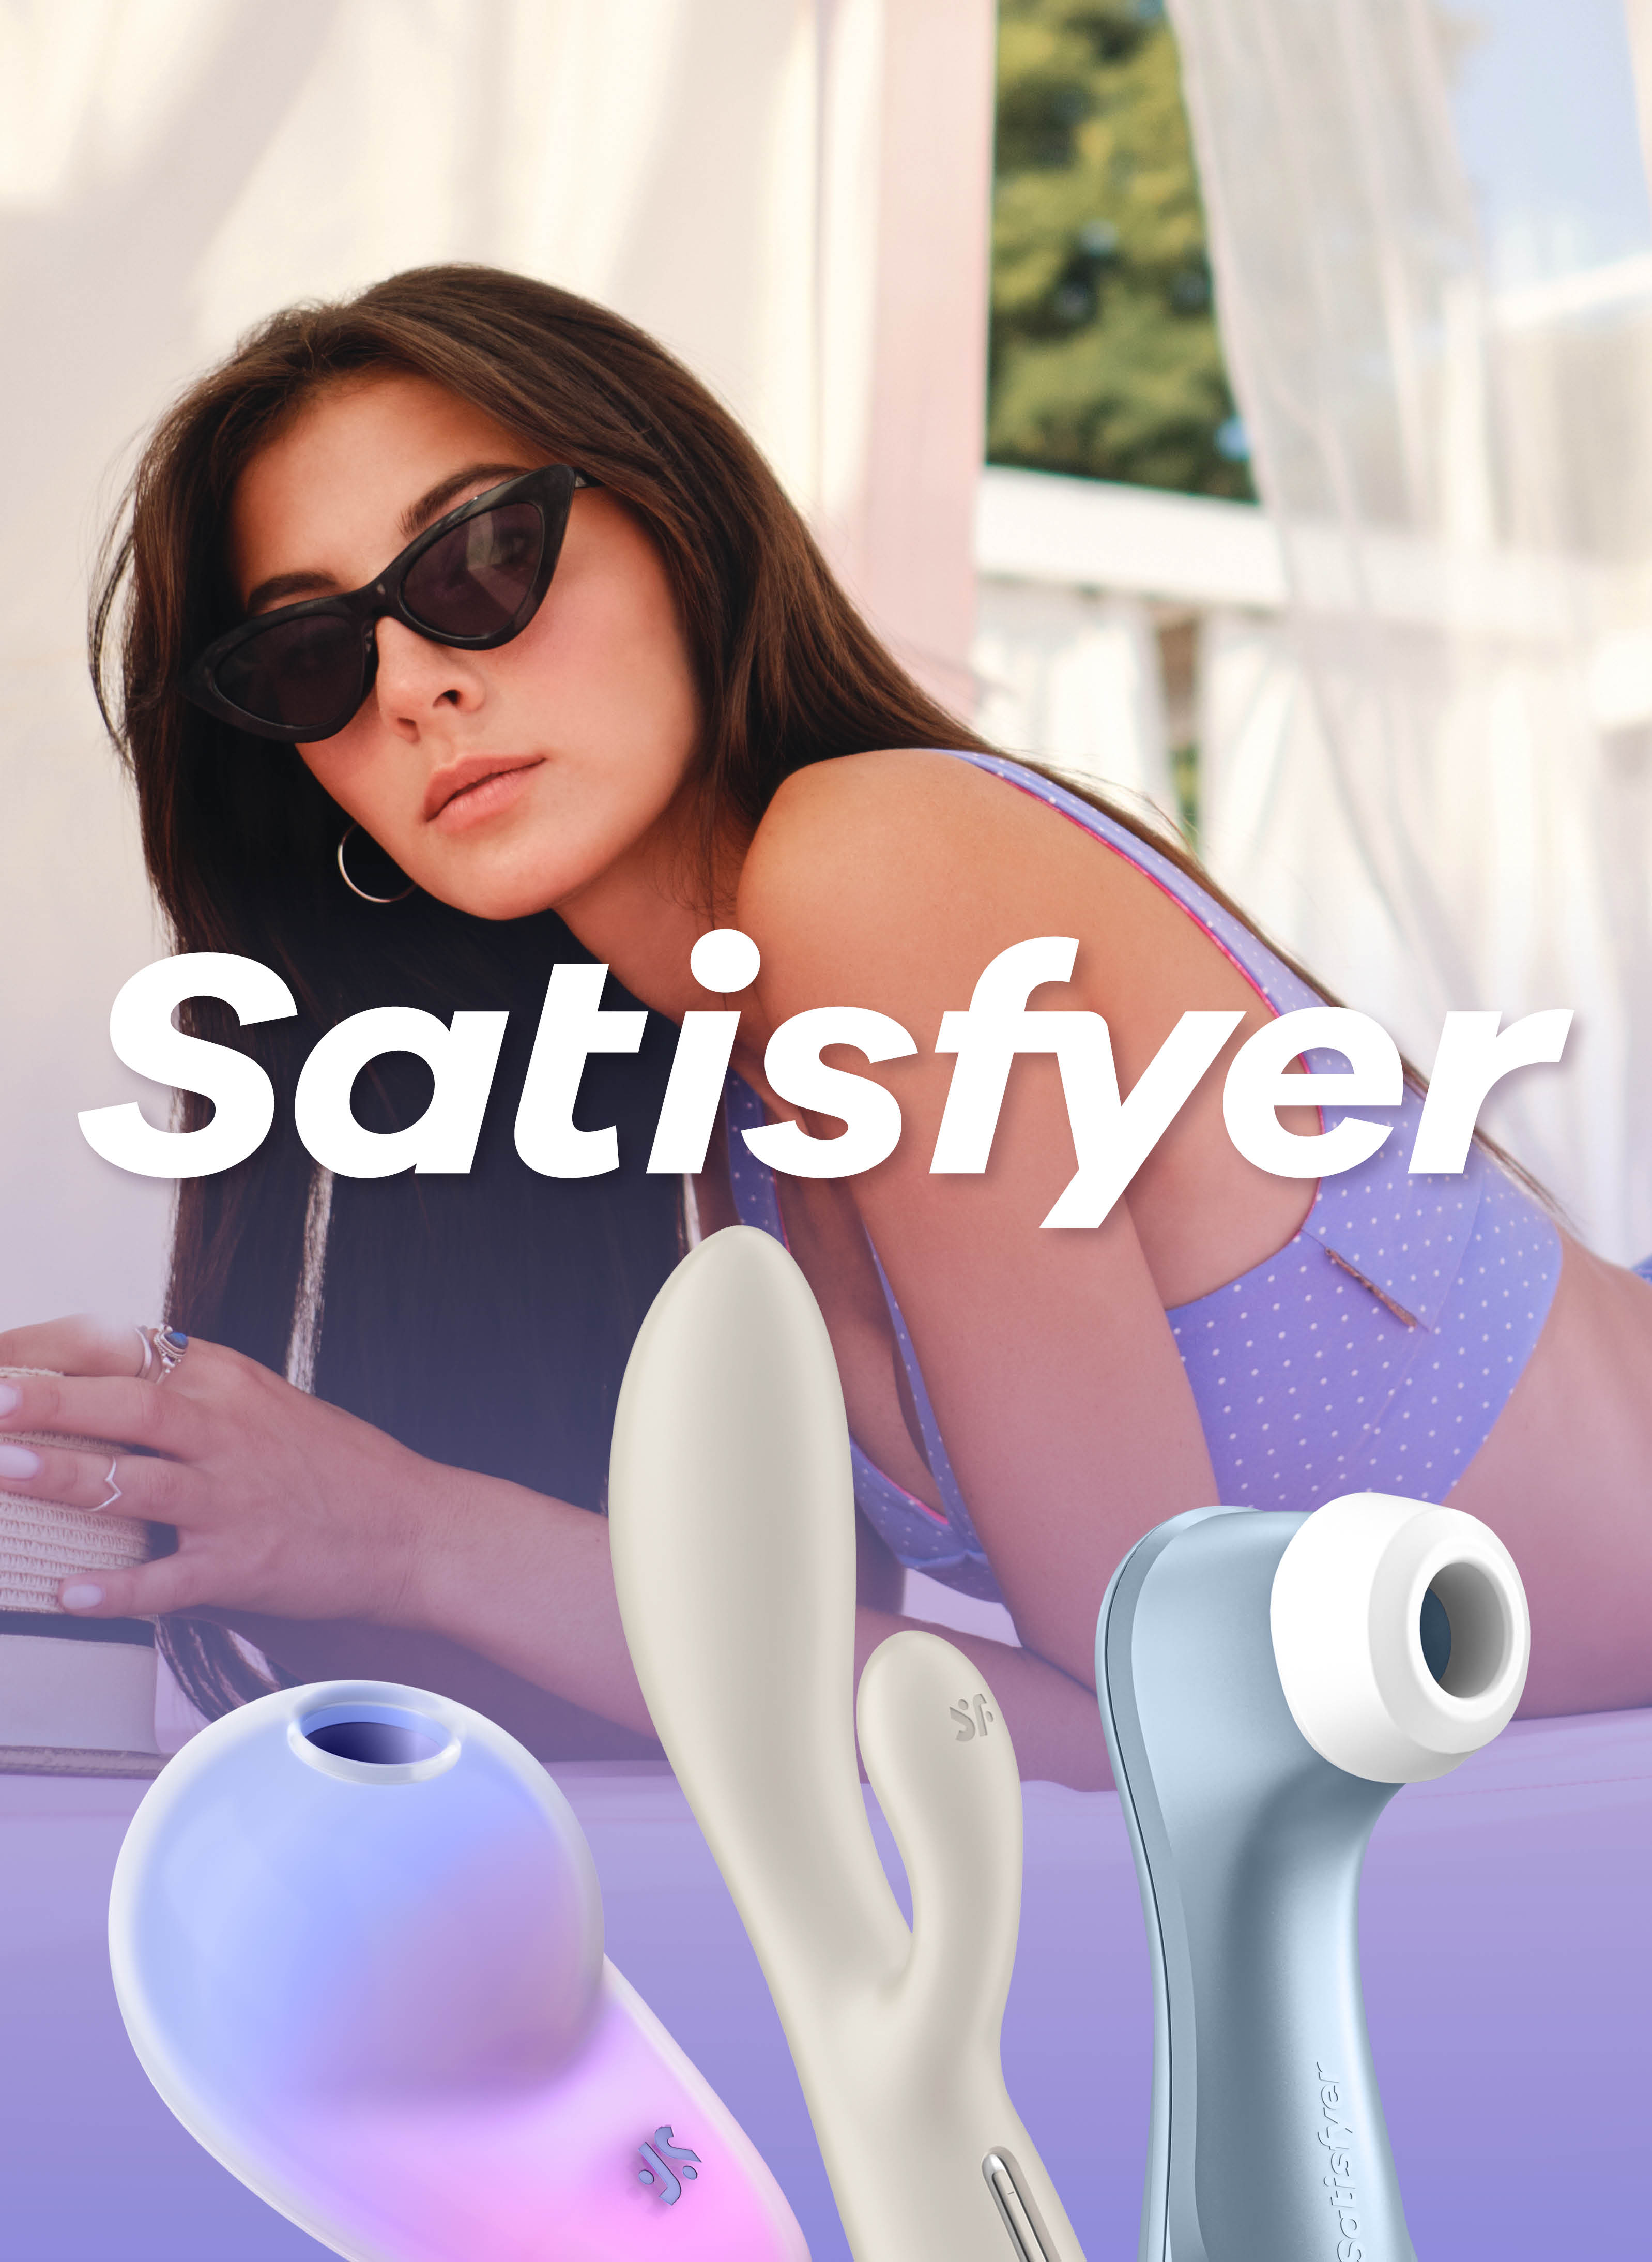 Simply Pleasure Promotional Image - Satisfyer Sex Toys - Masturbation May - 10% Off - Mobile